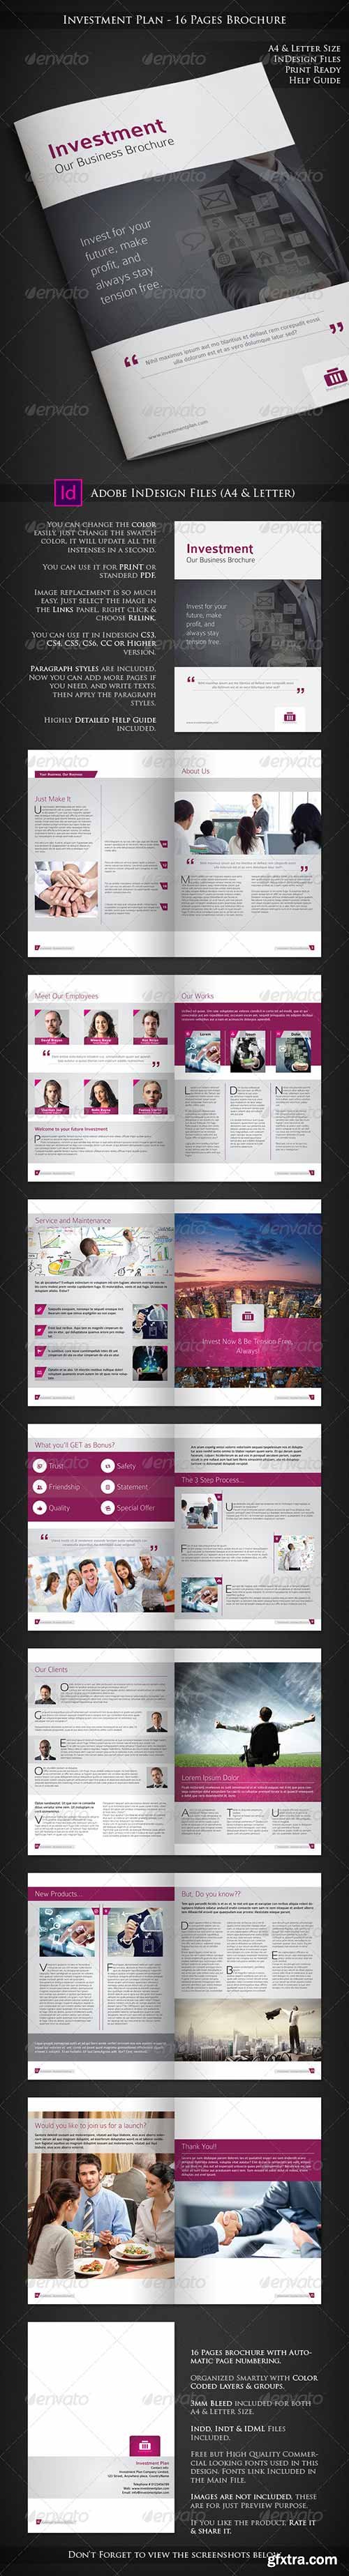 Graphicriver - Investment Plan - 16 Pages Business Brochure 6603457